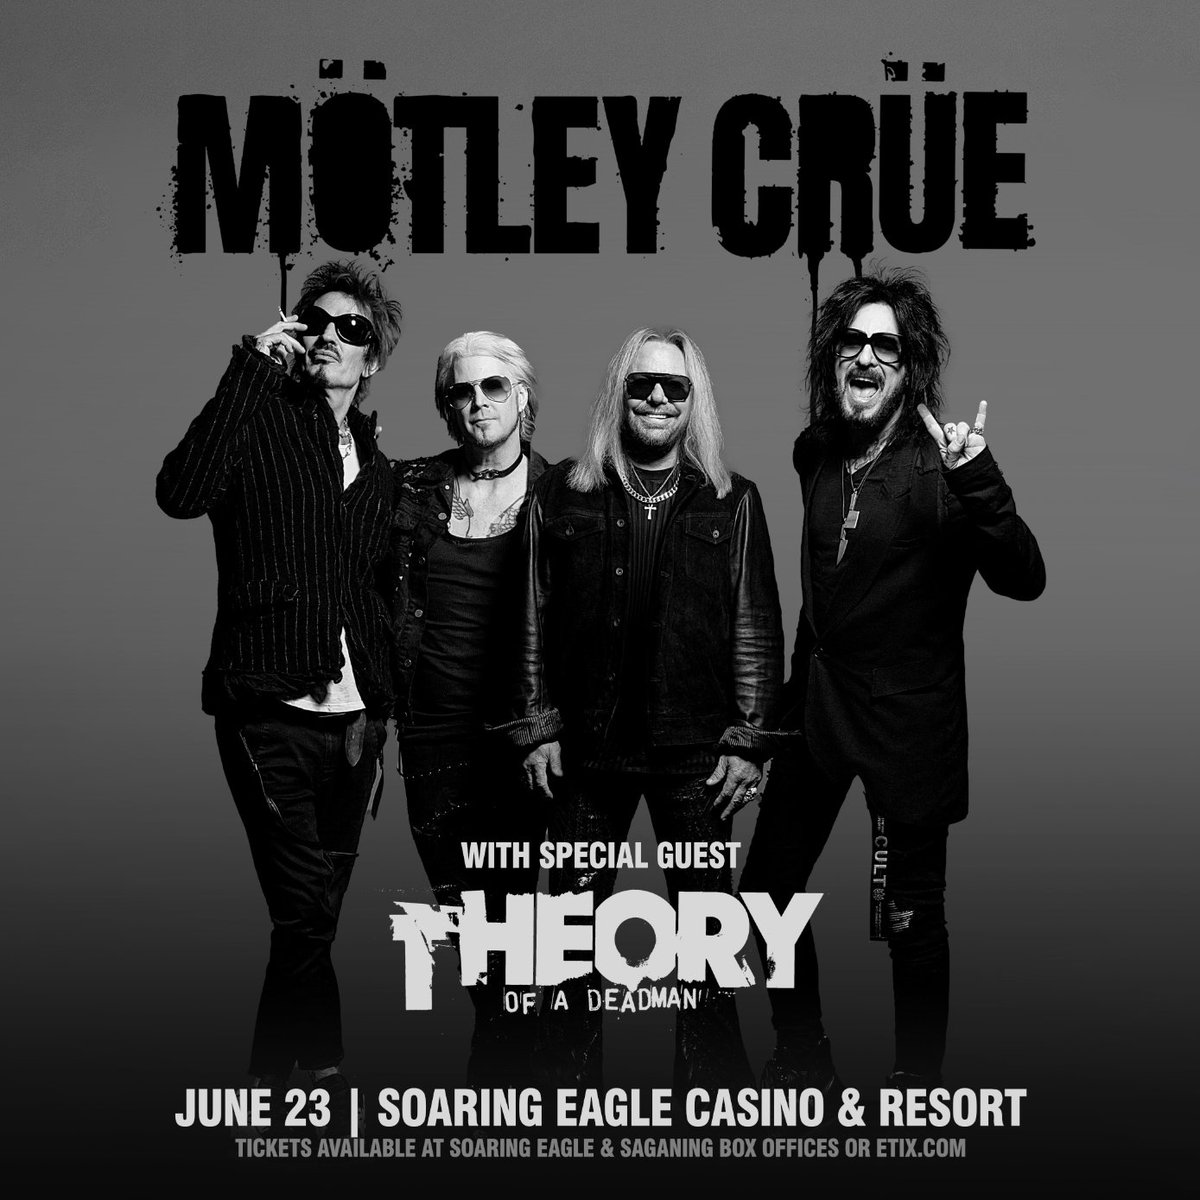 Excited to announce that we'll be opening up for none other than @motleycrue this June at @SoaringEagle777 in Michigan!! Tickets are already on sale, so grab yours and get ready to ROCK 🤘